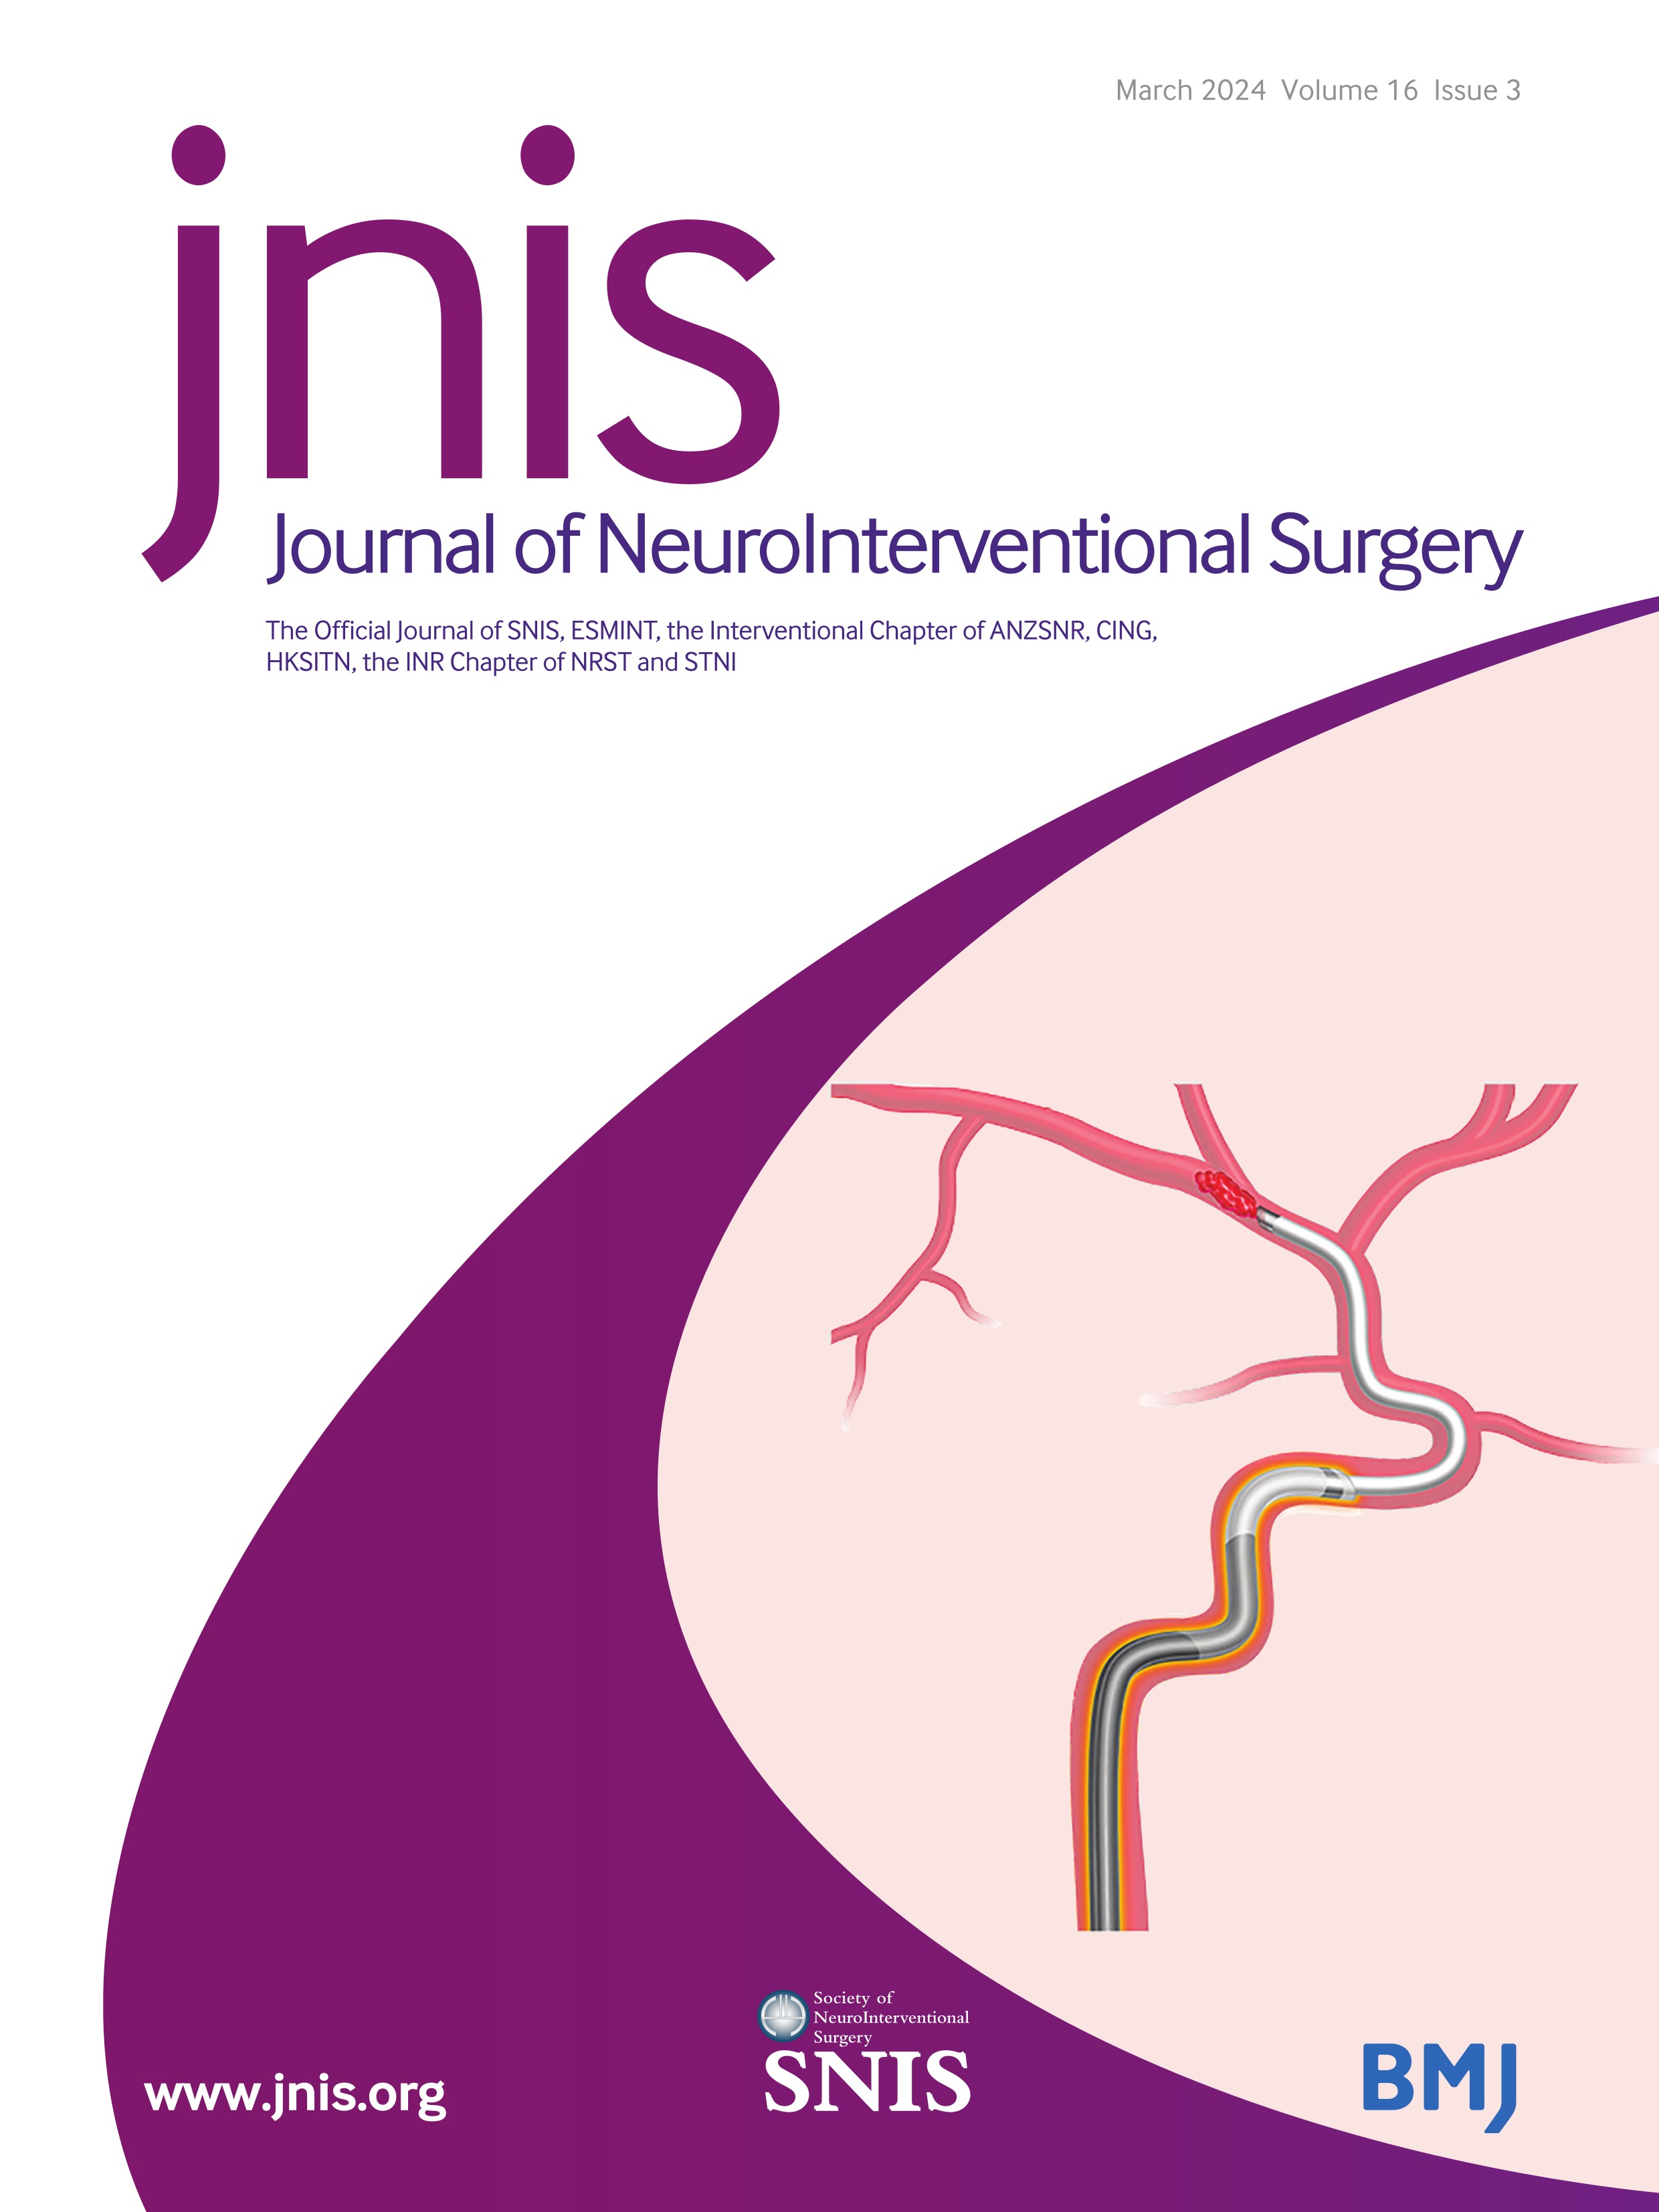 Correspondence on 'The Zoom RDL radial access system for neurointervention: an early single-center experience by Morsi et al